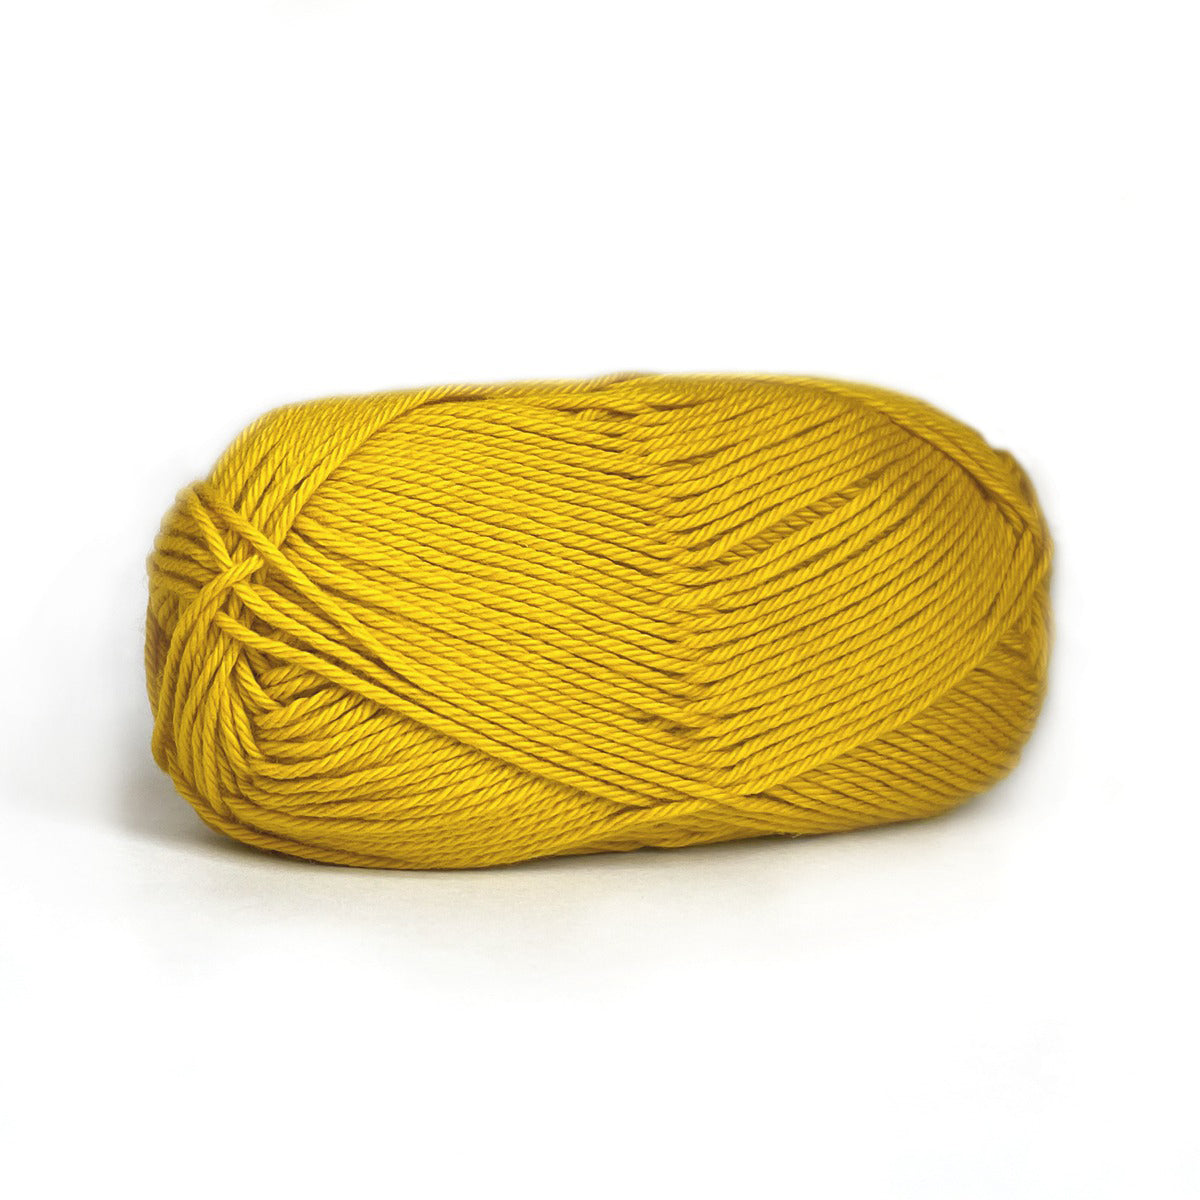 Skipper - All-natural soft cotton yarn for knitting and crochet